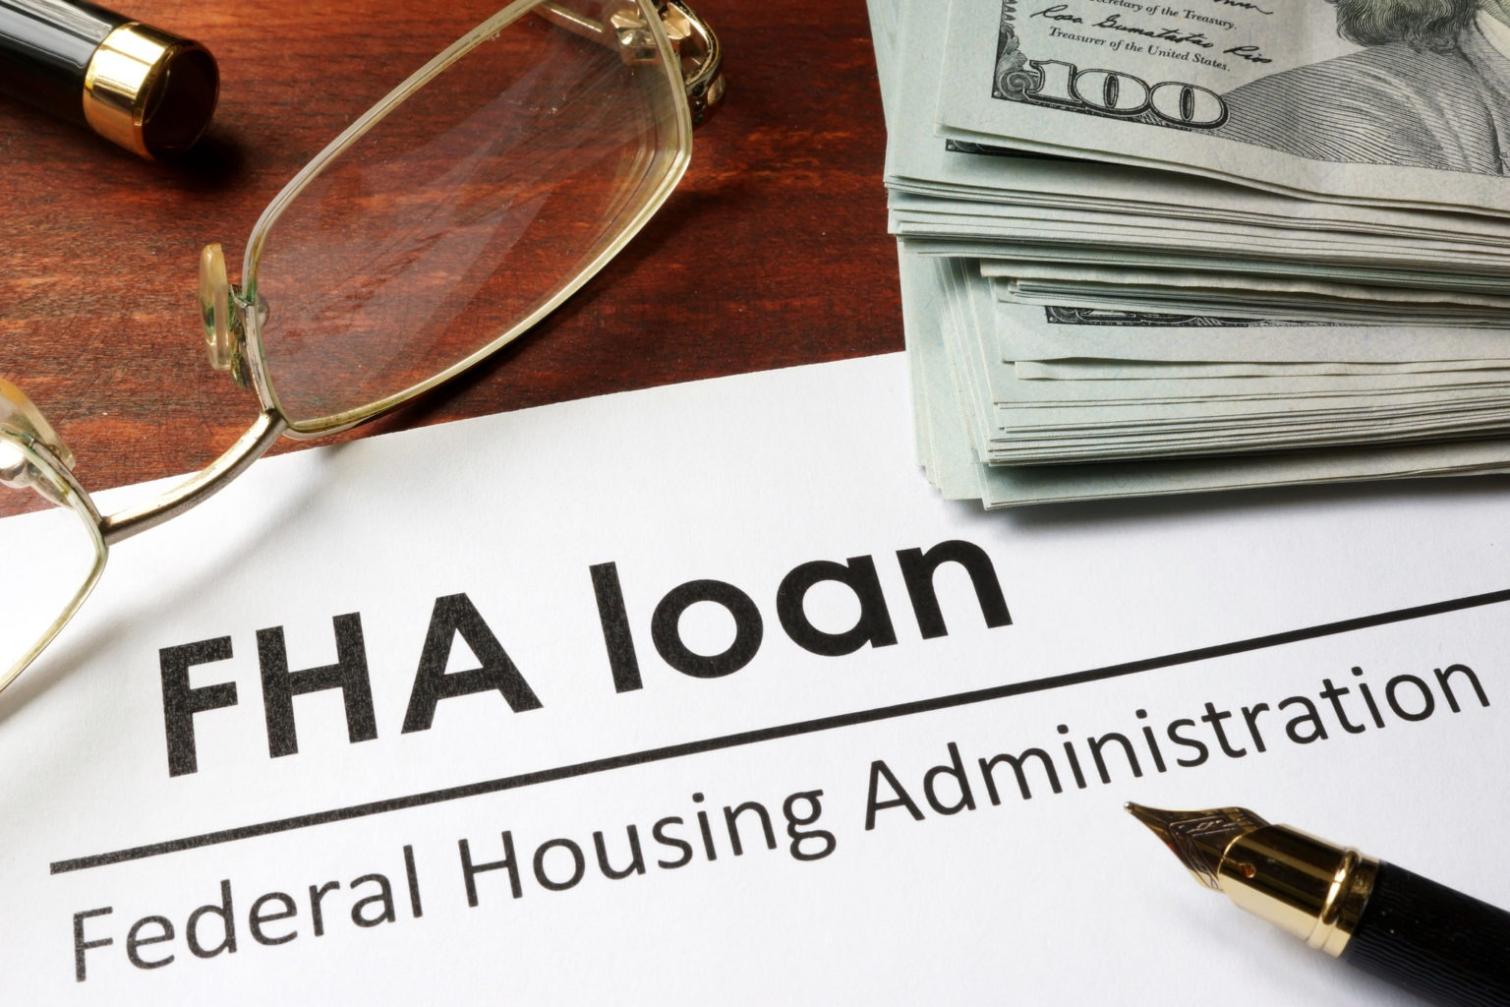 What Are the Interest Rates on FHA Loans?